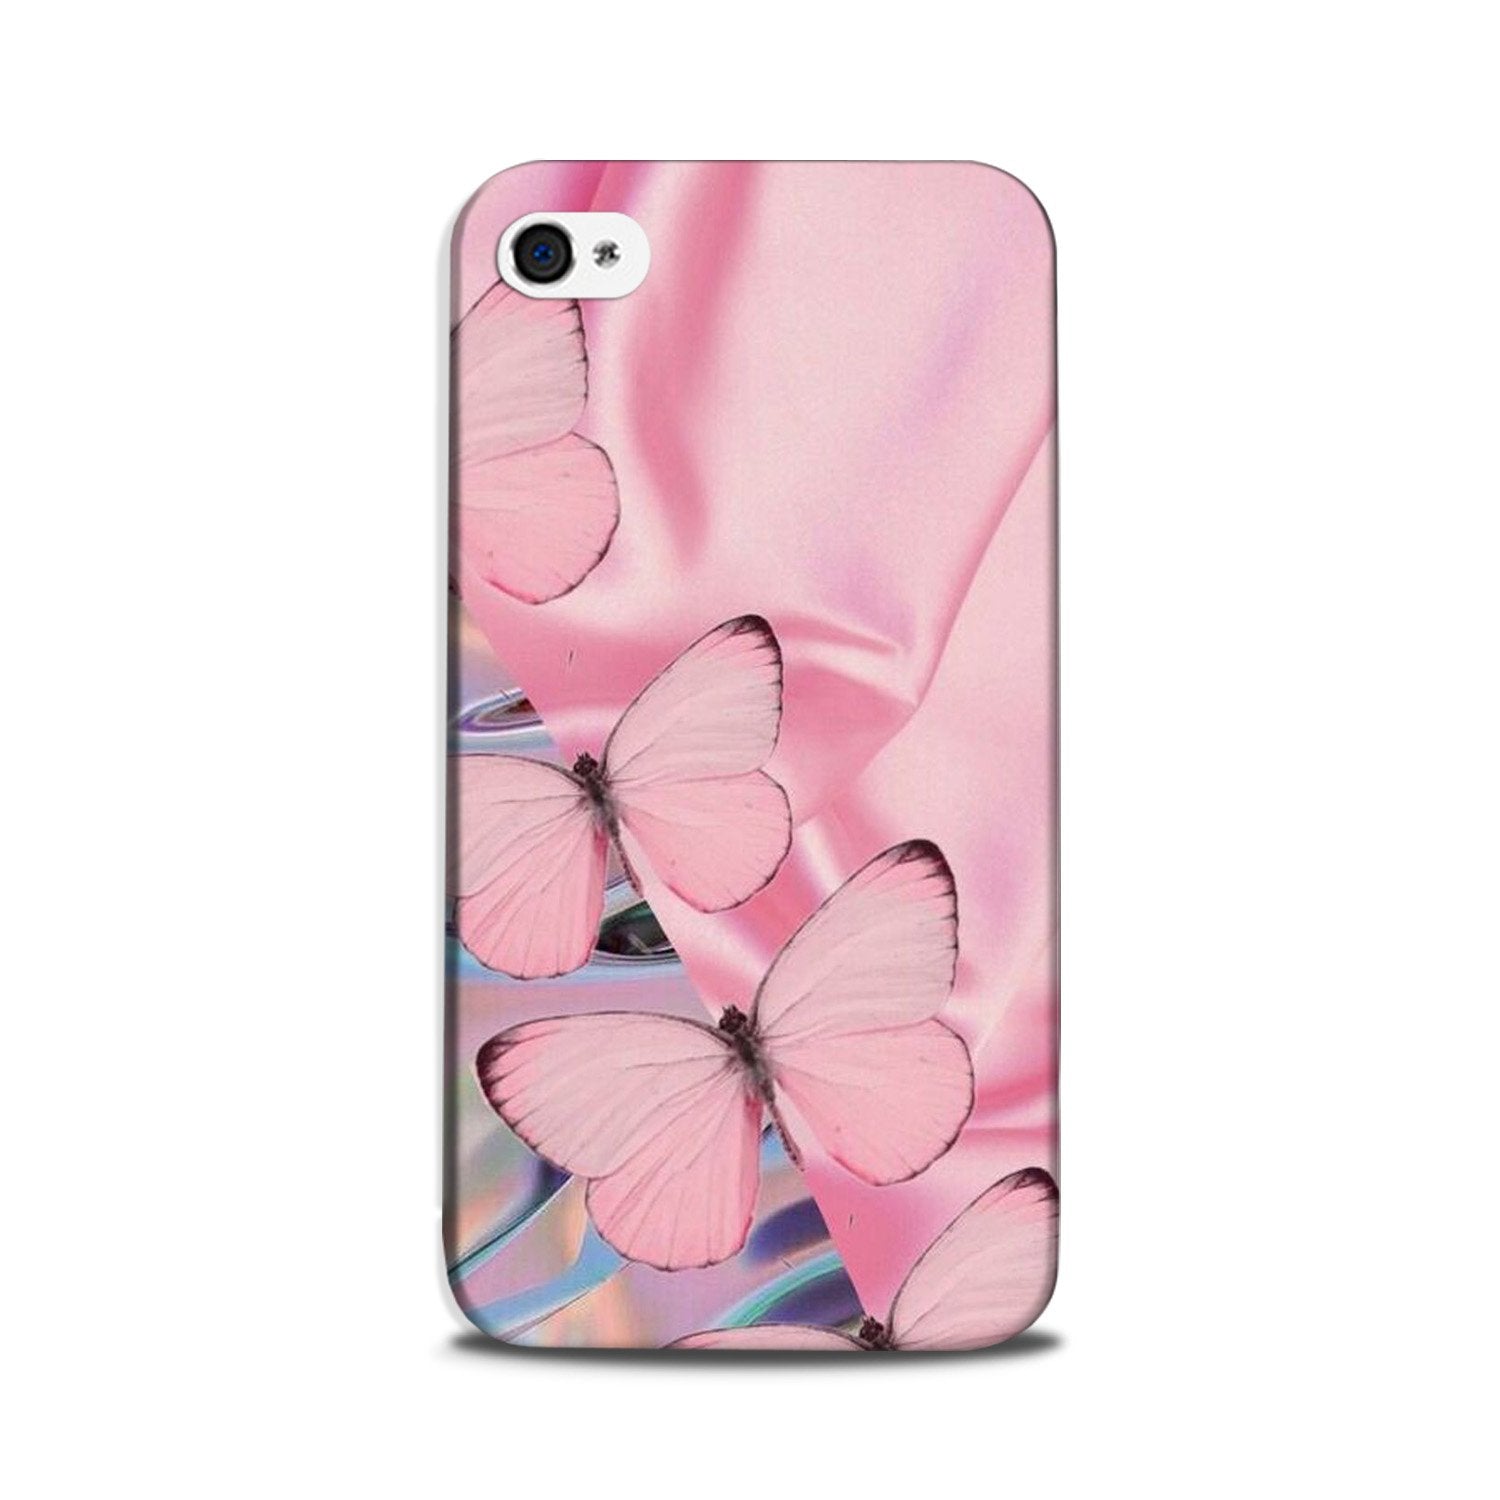 Butterflies Case for iPhone 5/ 5s